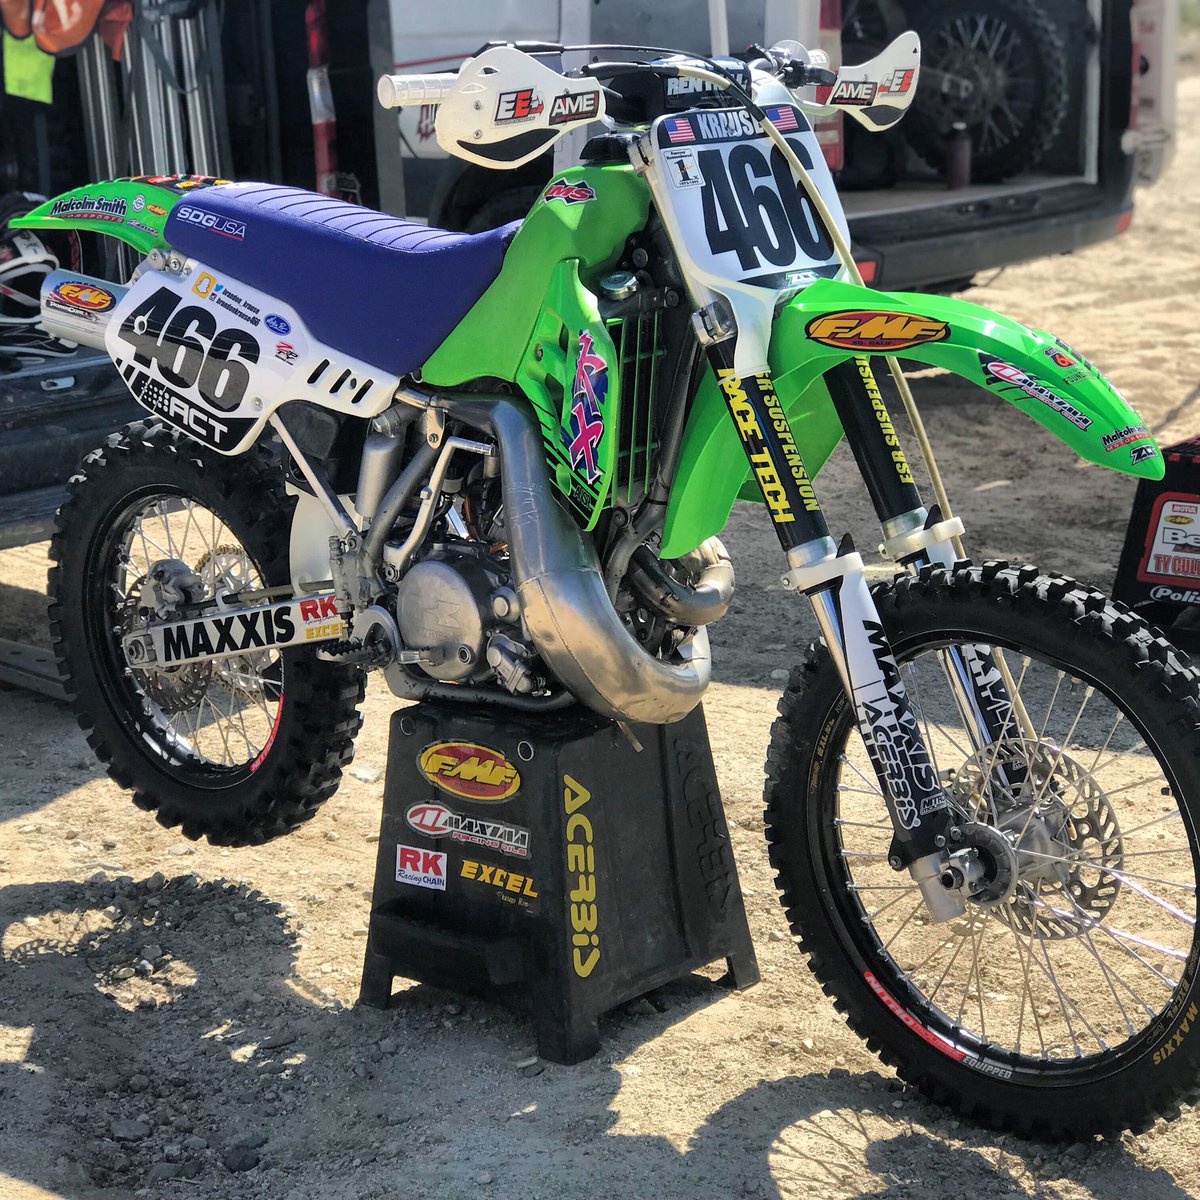 Got the steed looking good for the 2 stroke nationals this weekend @glenhelenraceway. Hope I can hold on!😅 #kx500 || #2strokenational || #brando